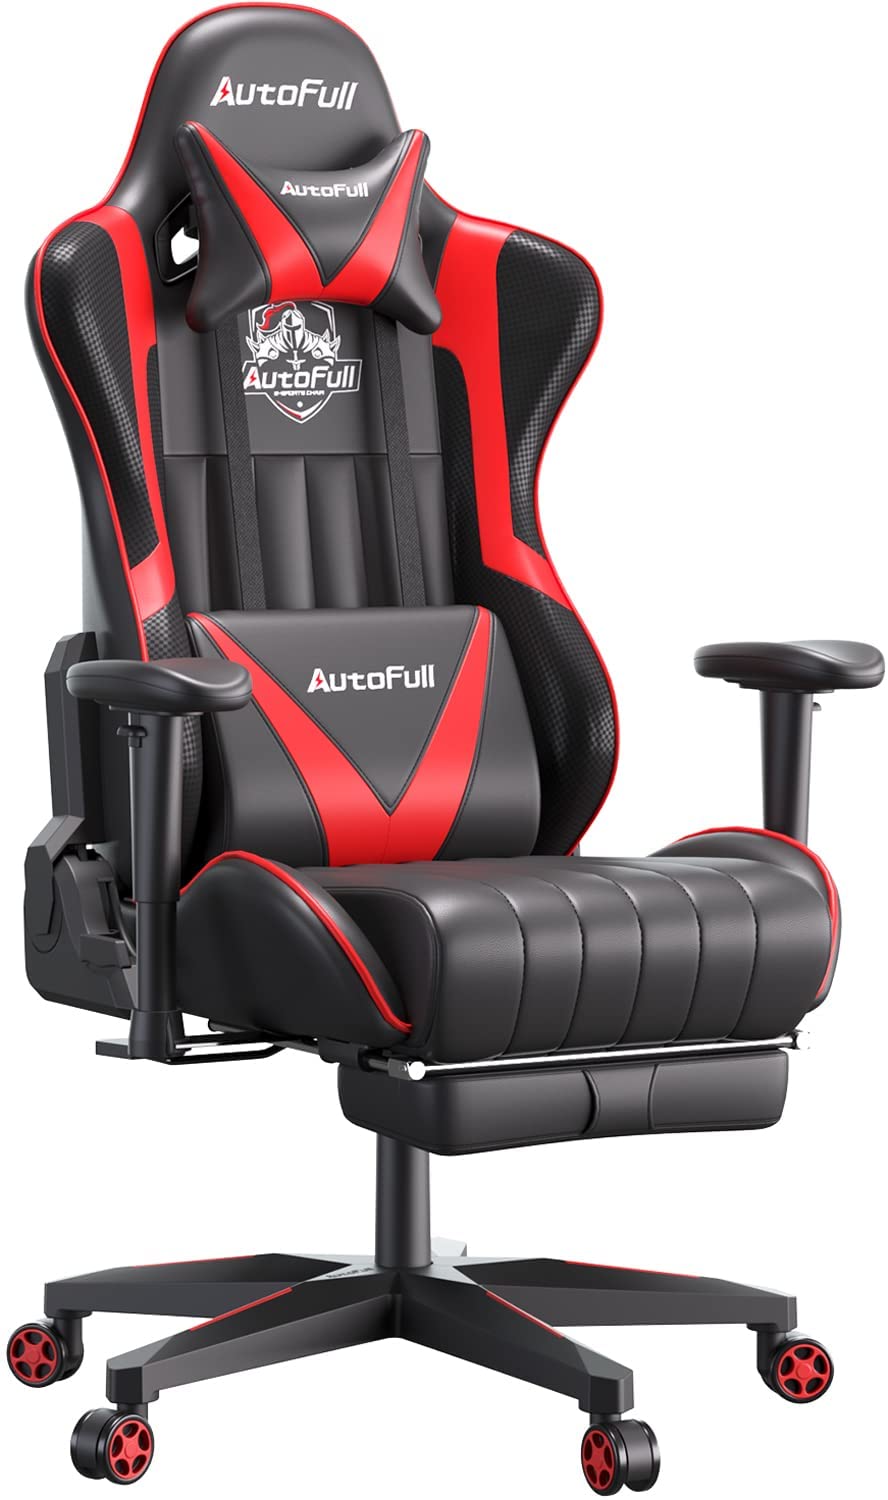 Can I use gaming chair for studying